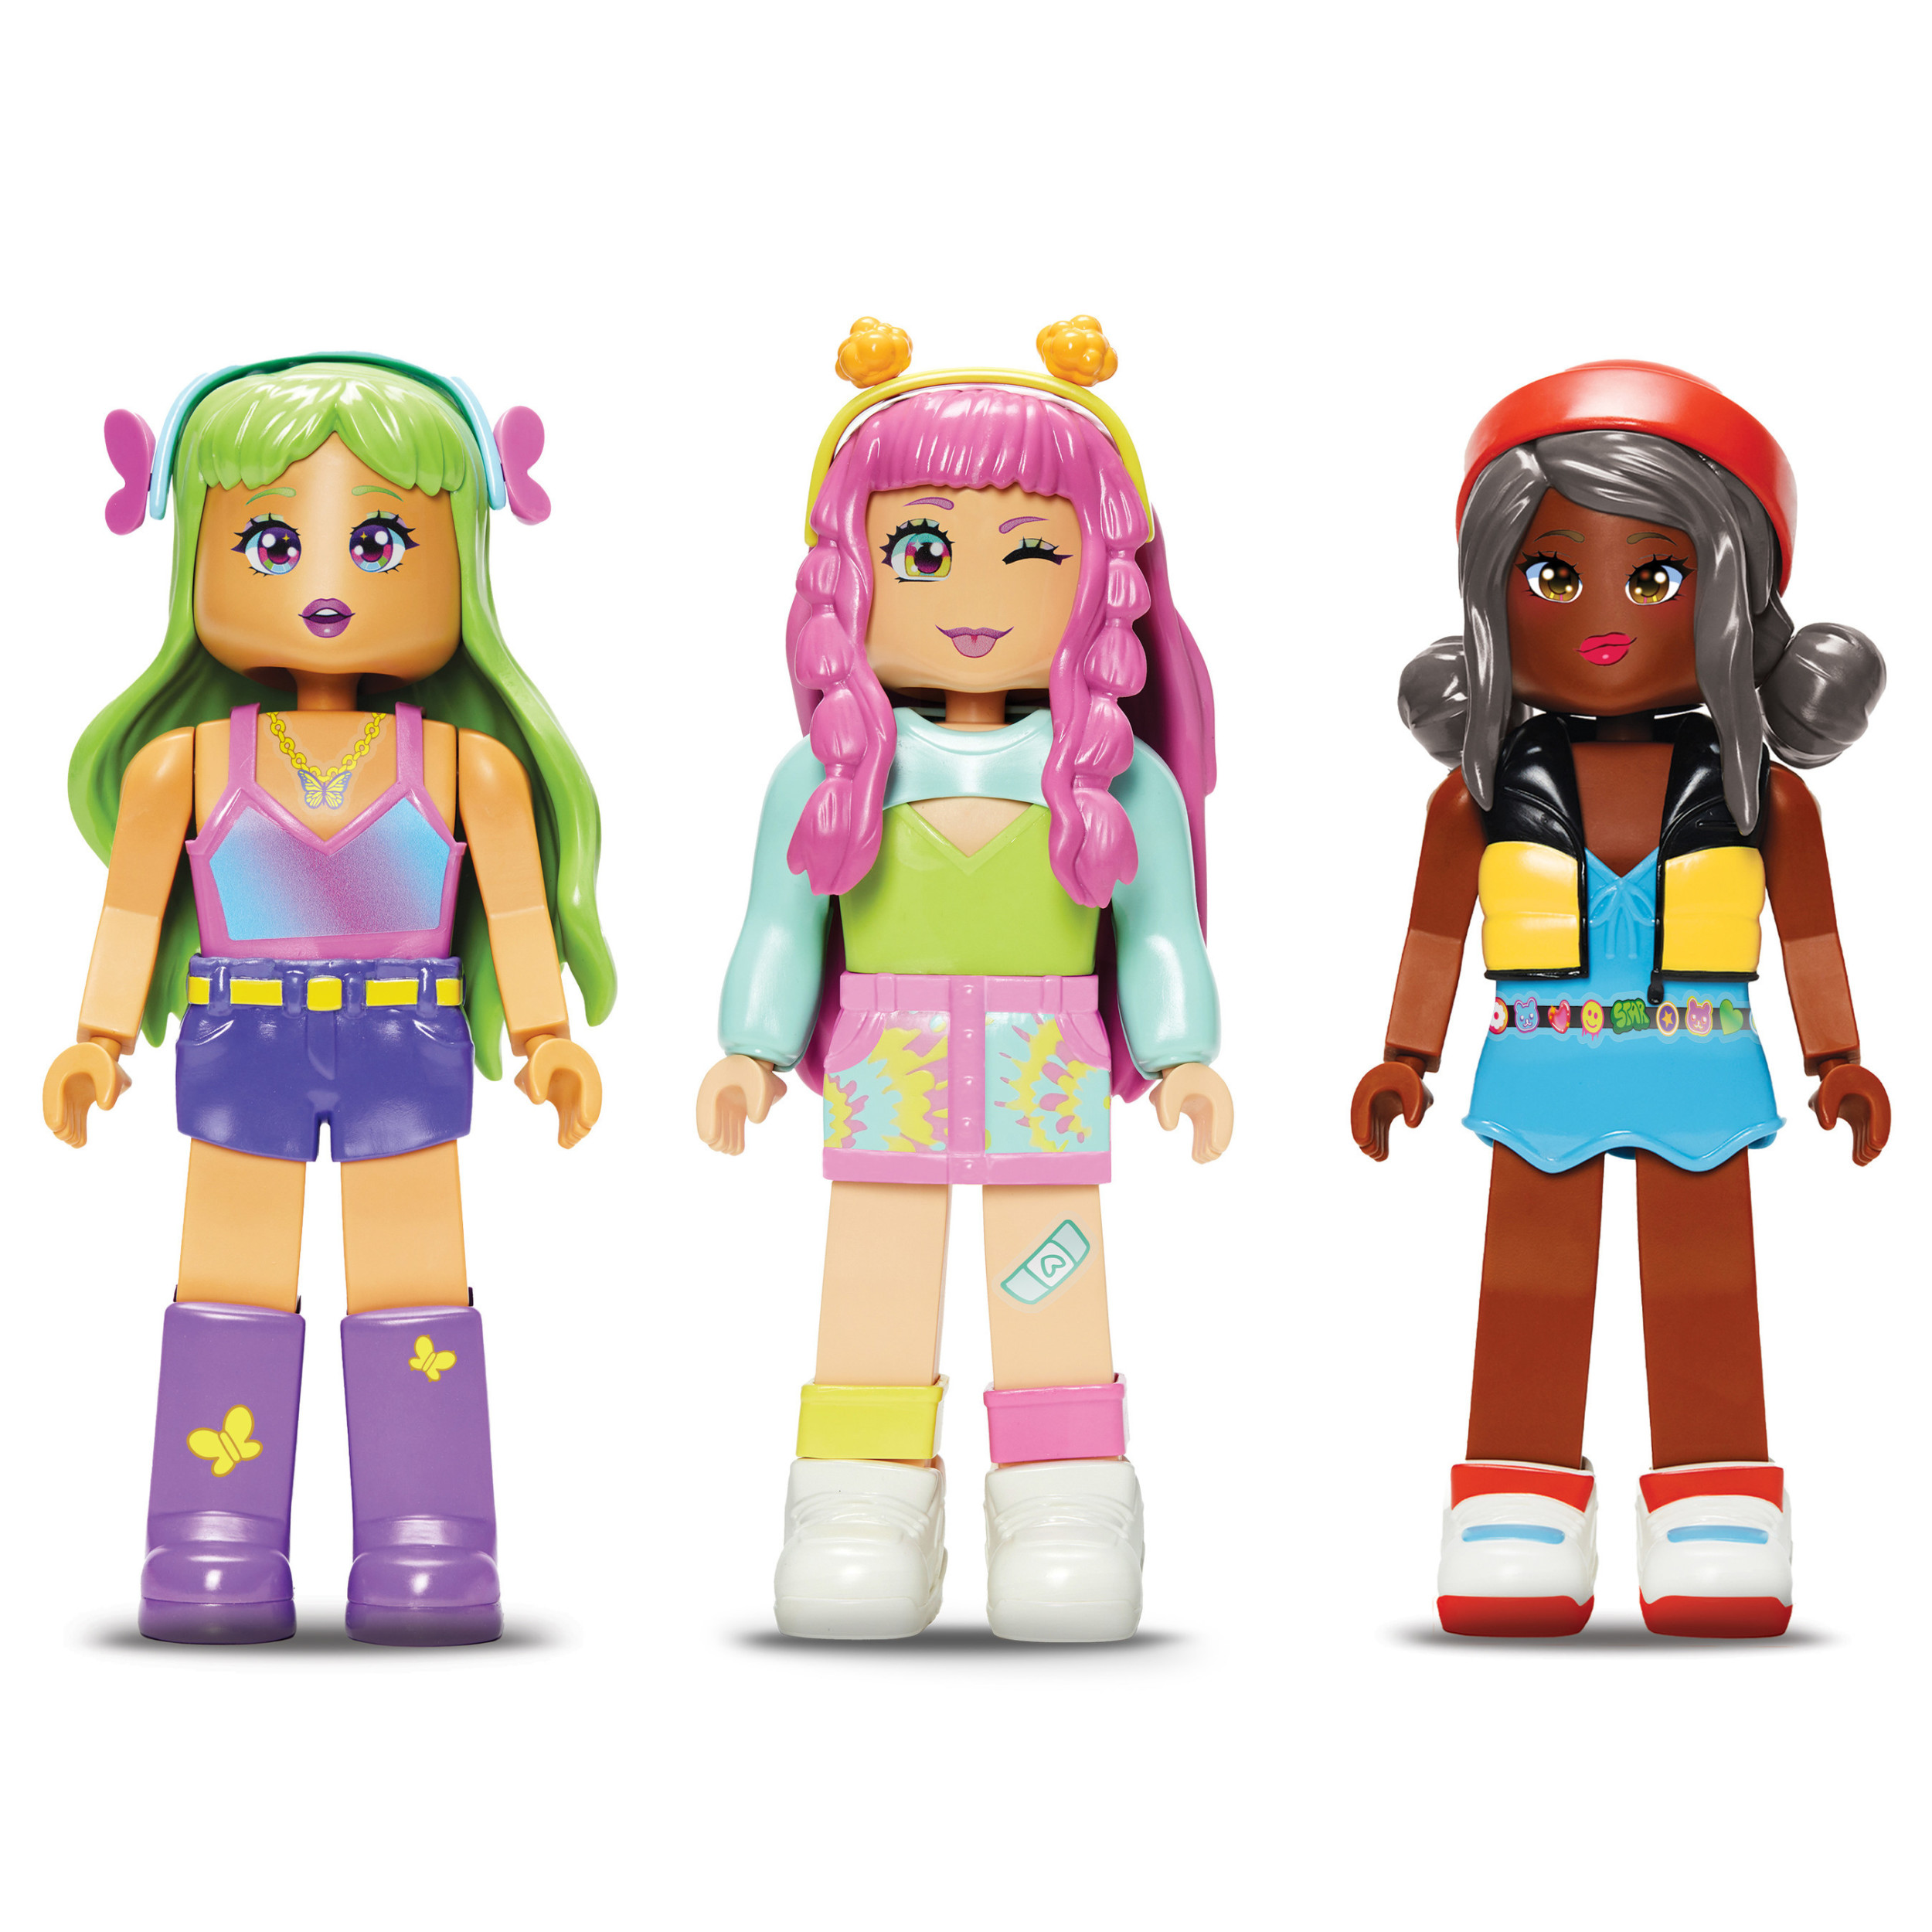 WowWee launches My Avastars next gen fashion dolls -Toy World Magazine |  The business magazine with a passion for toys